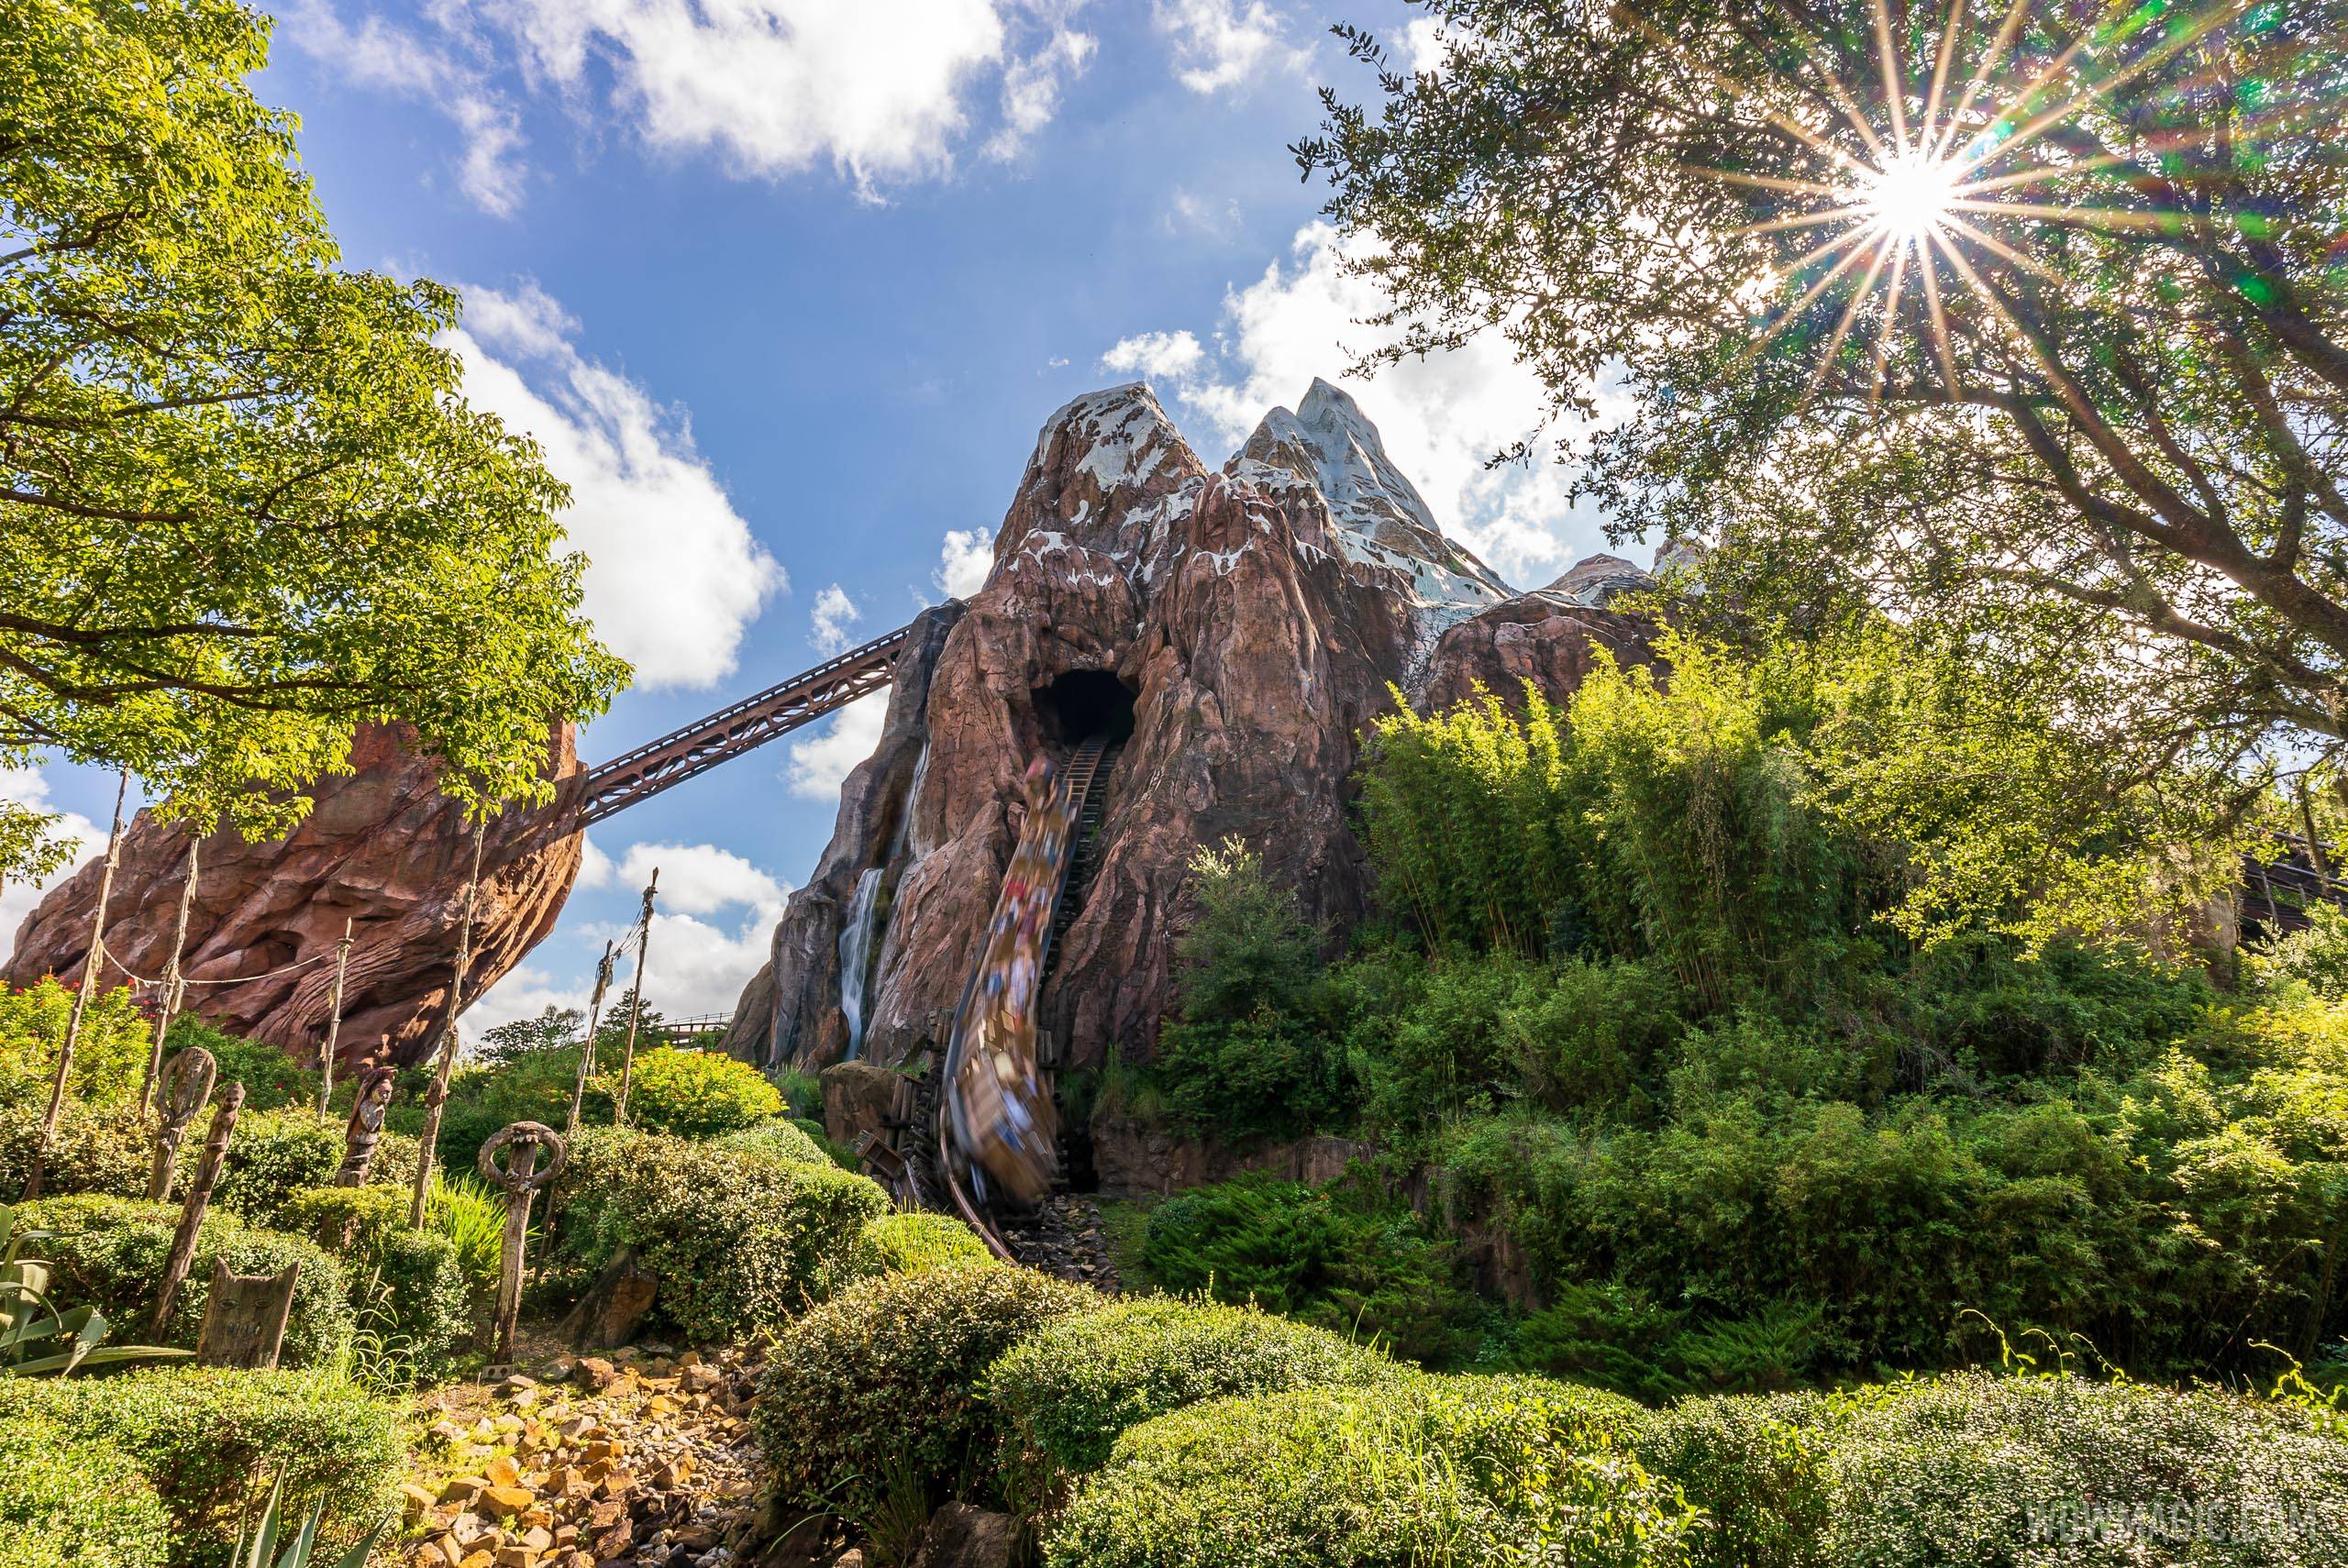 Expedition Everest Lightning Lane access will cost $7 per person